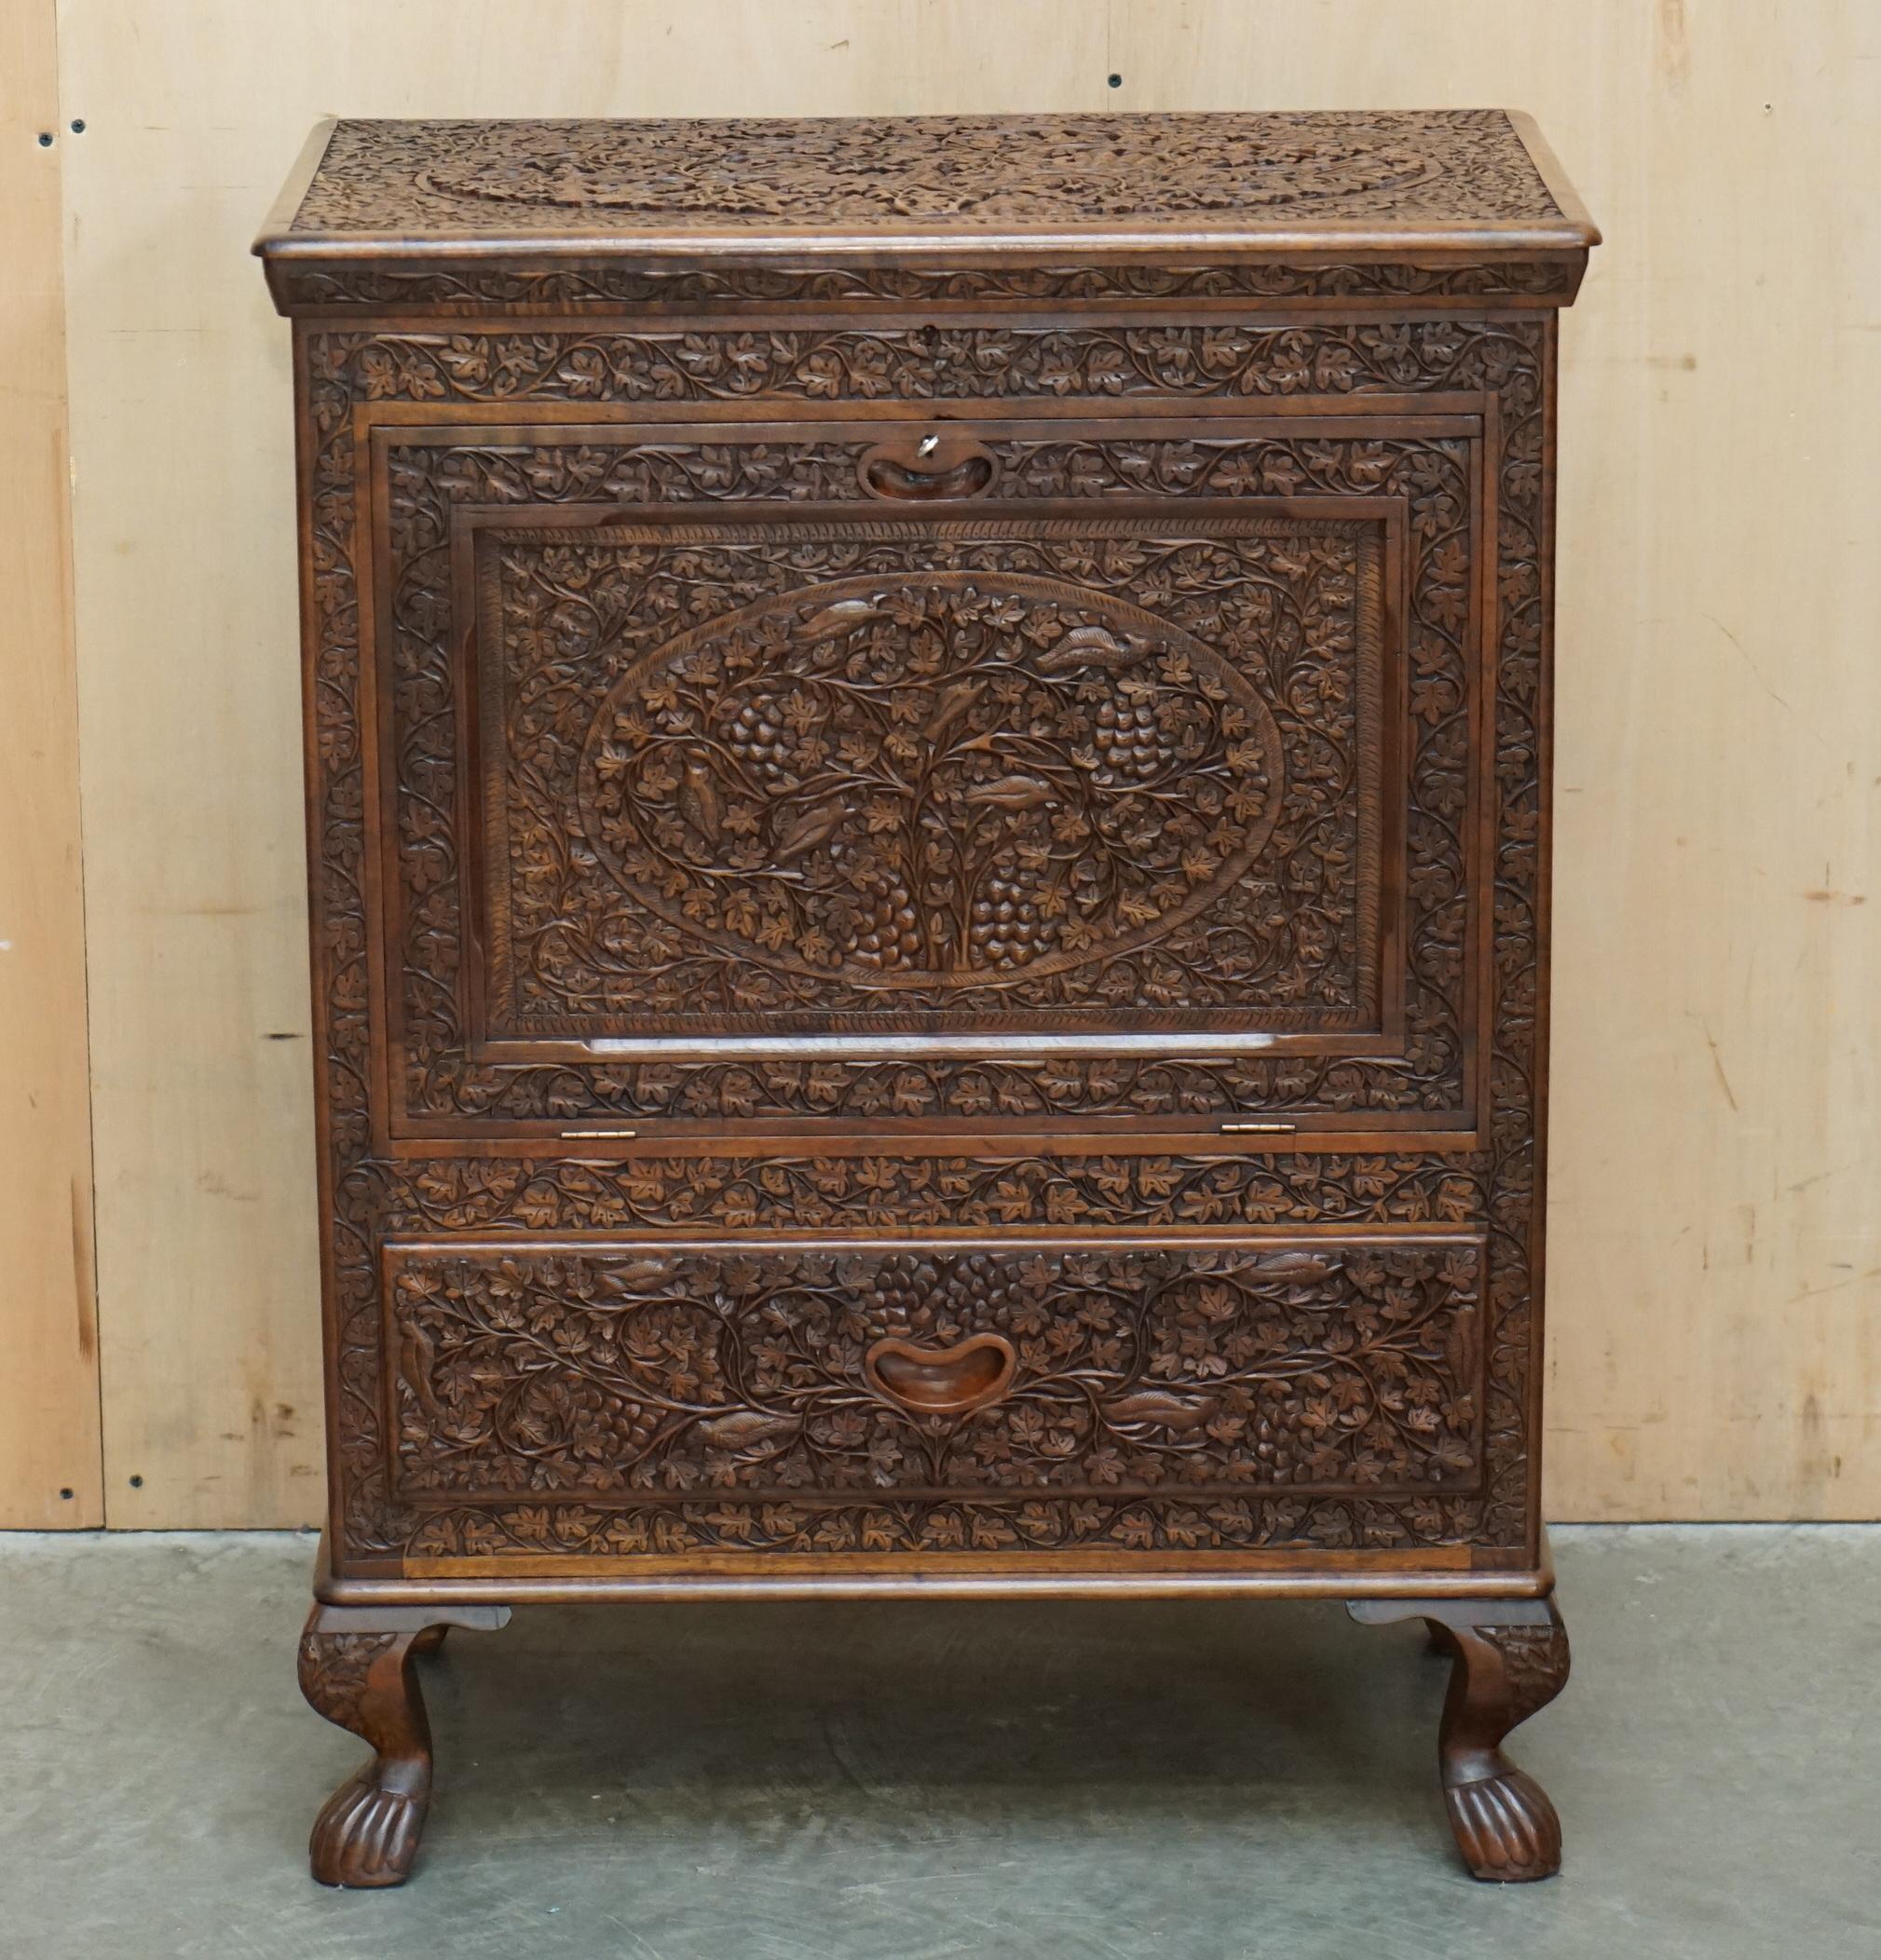 Royal House Antiques

Royal House Antiques is delighted to offer for sale this stunning Antique circa 1910 British Colonial Burmese ornately carved Rosewood drinks cabinet with original key 

Please note the delivery fee listed is just a guide, it